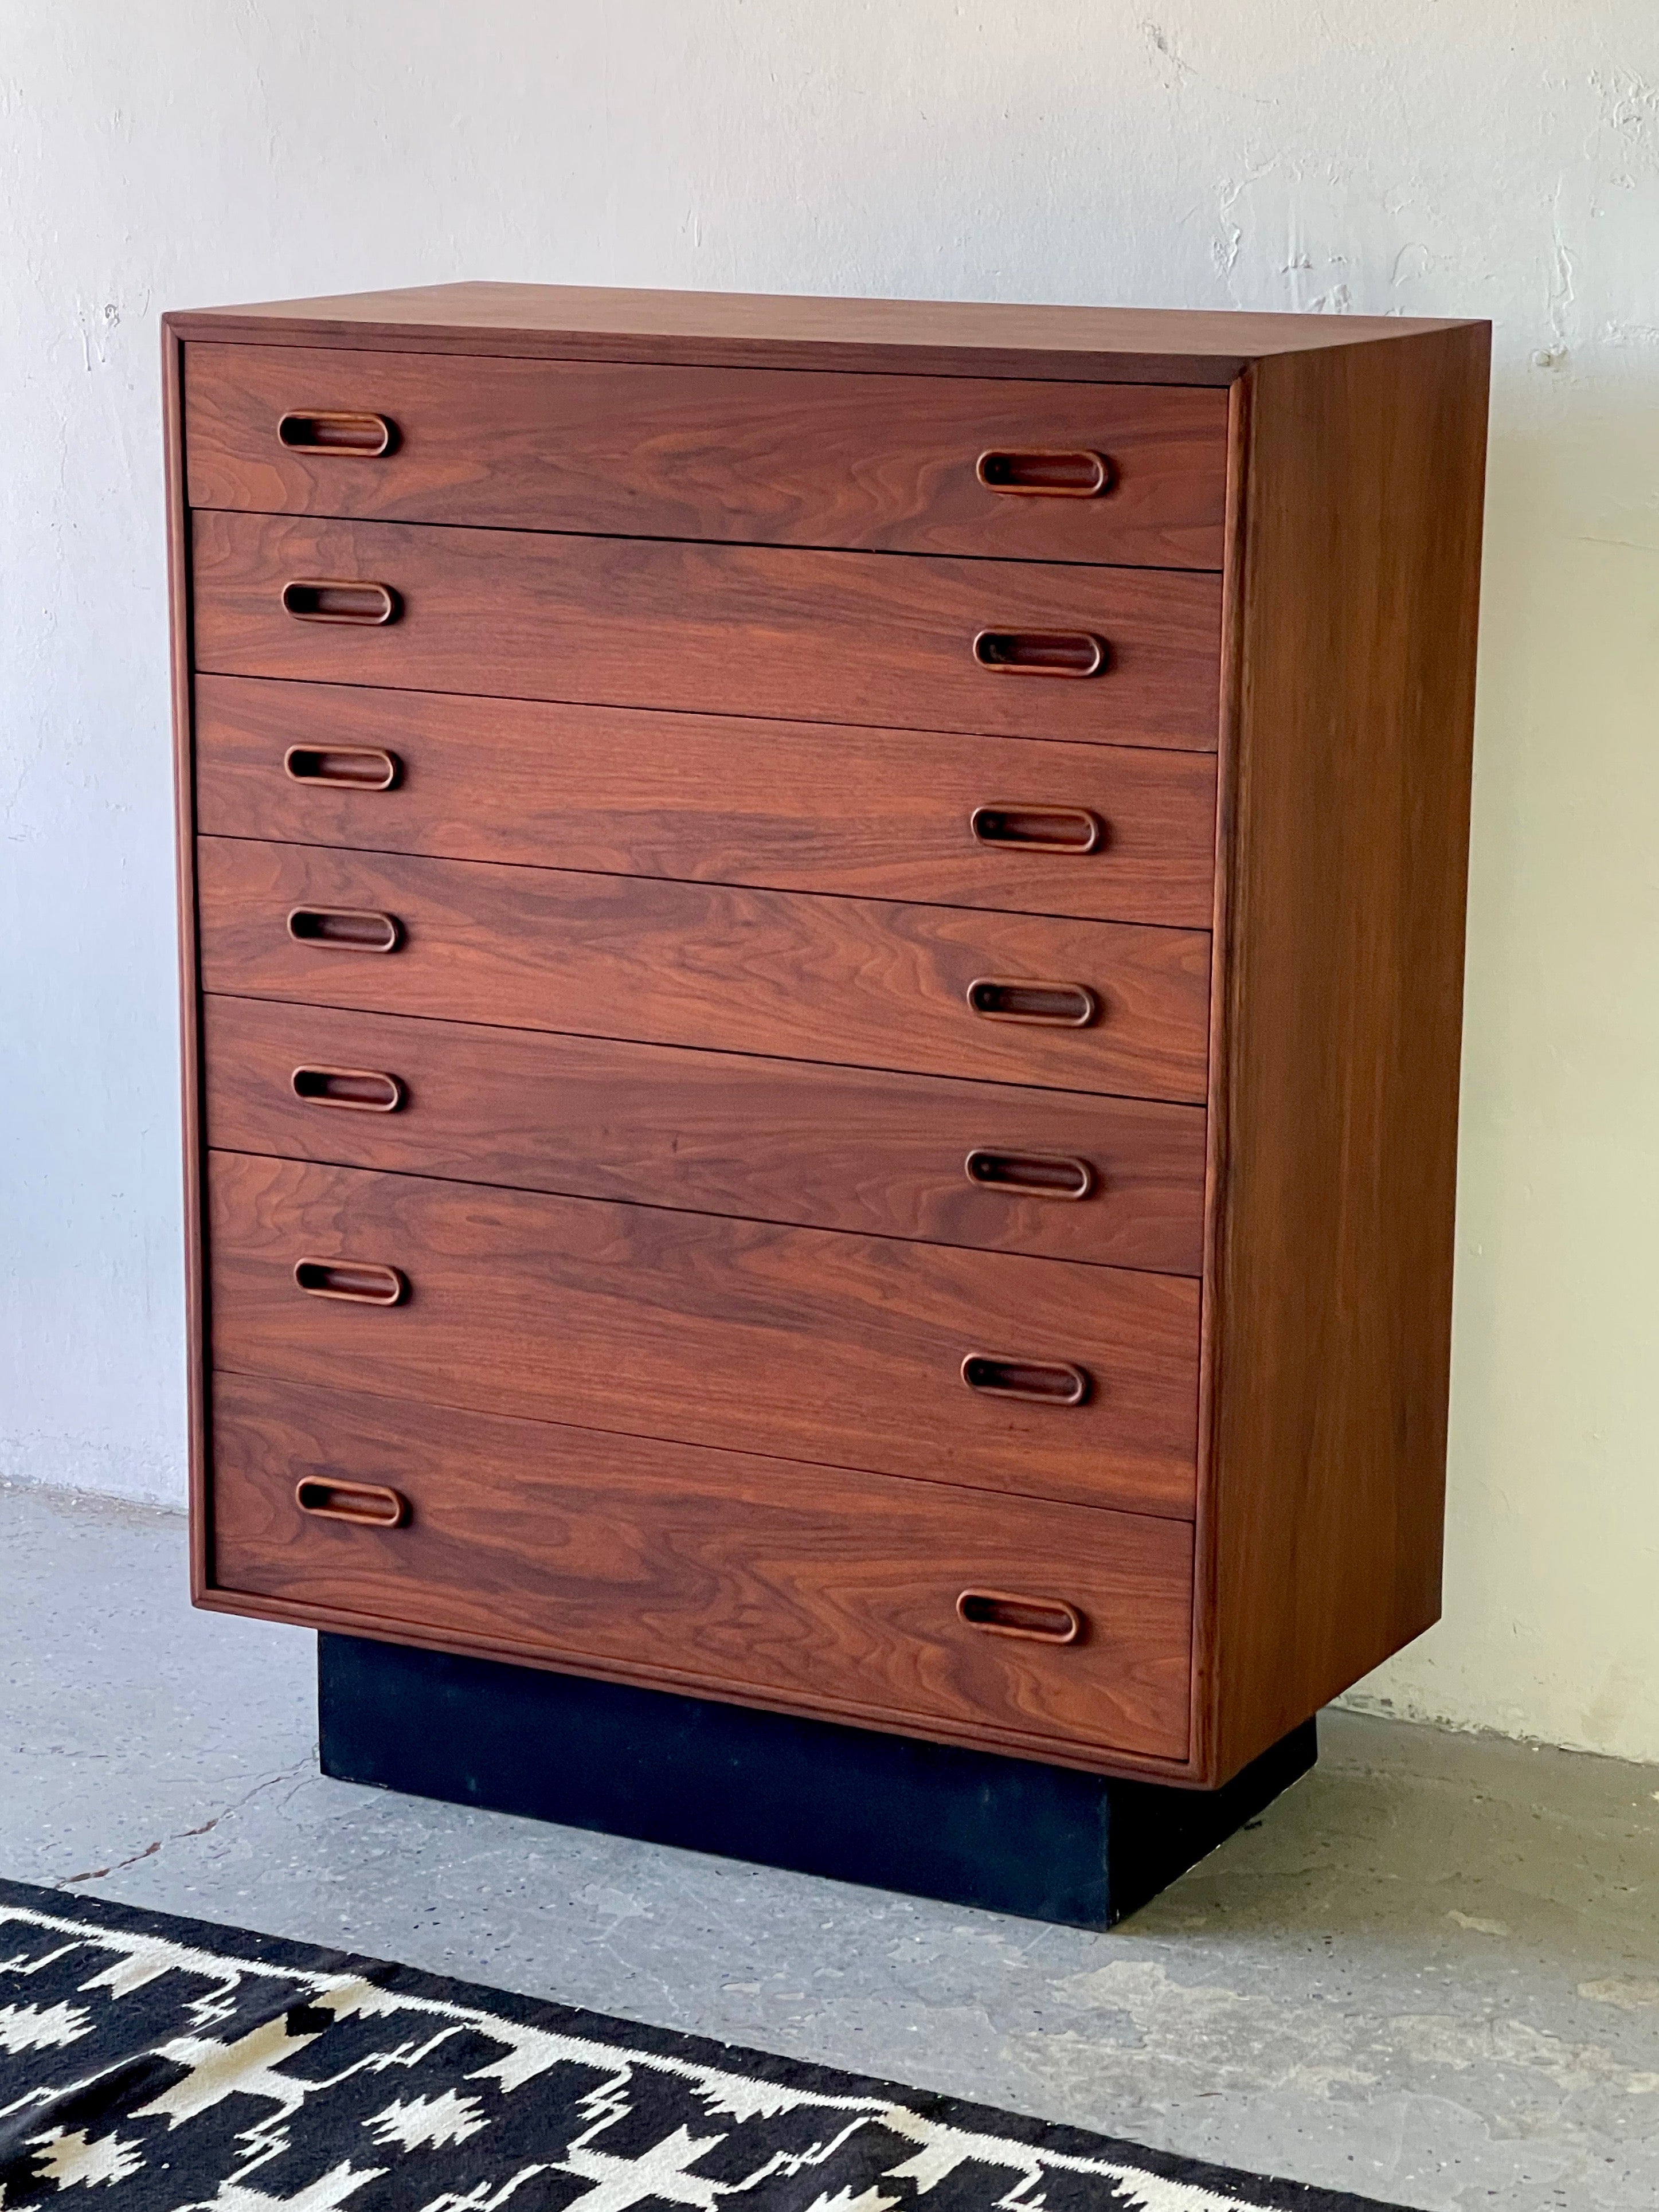 Jack Cartwright for Founders  Mid Century Modern Credenza Highboy
Walnut Highboy dresser by Founders. Designed by Jack Cartwright, this fantastic walnut dresser, has 7 drawers. Wonderful American design.

36 inches wide 46.5  inches High 18 inches